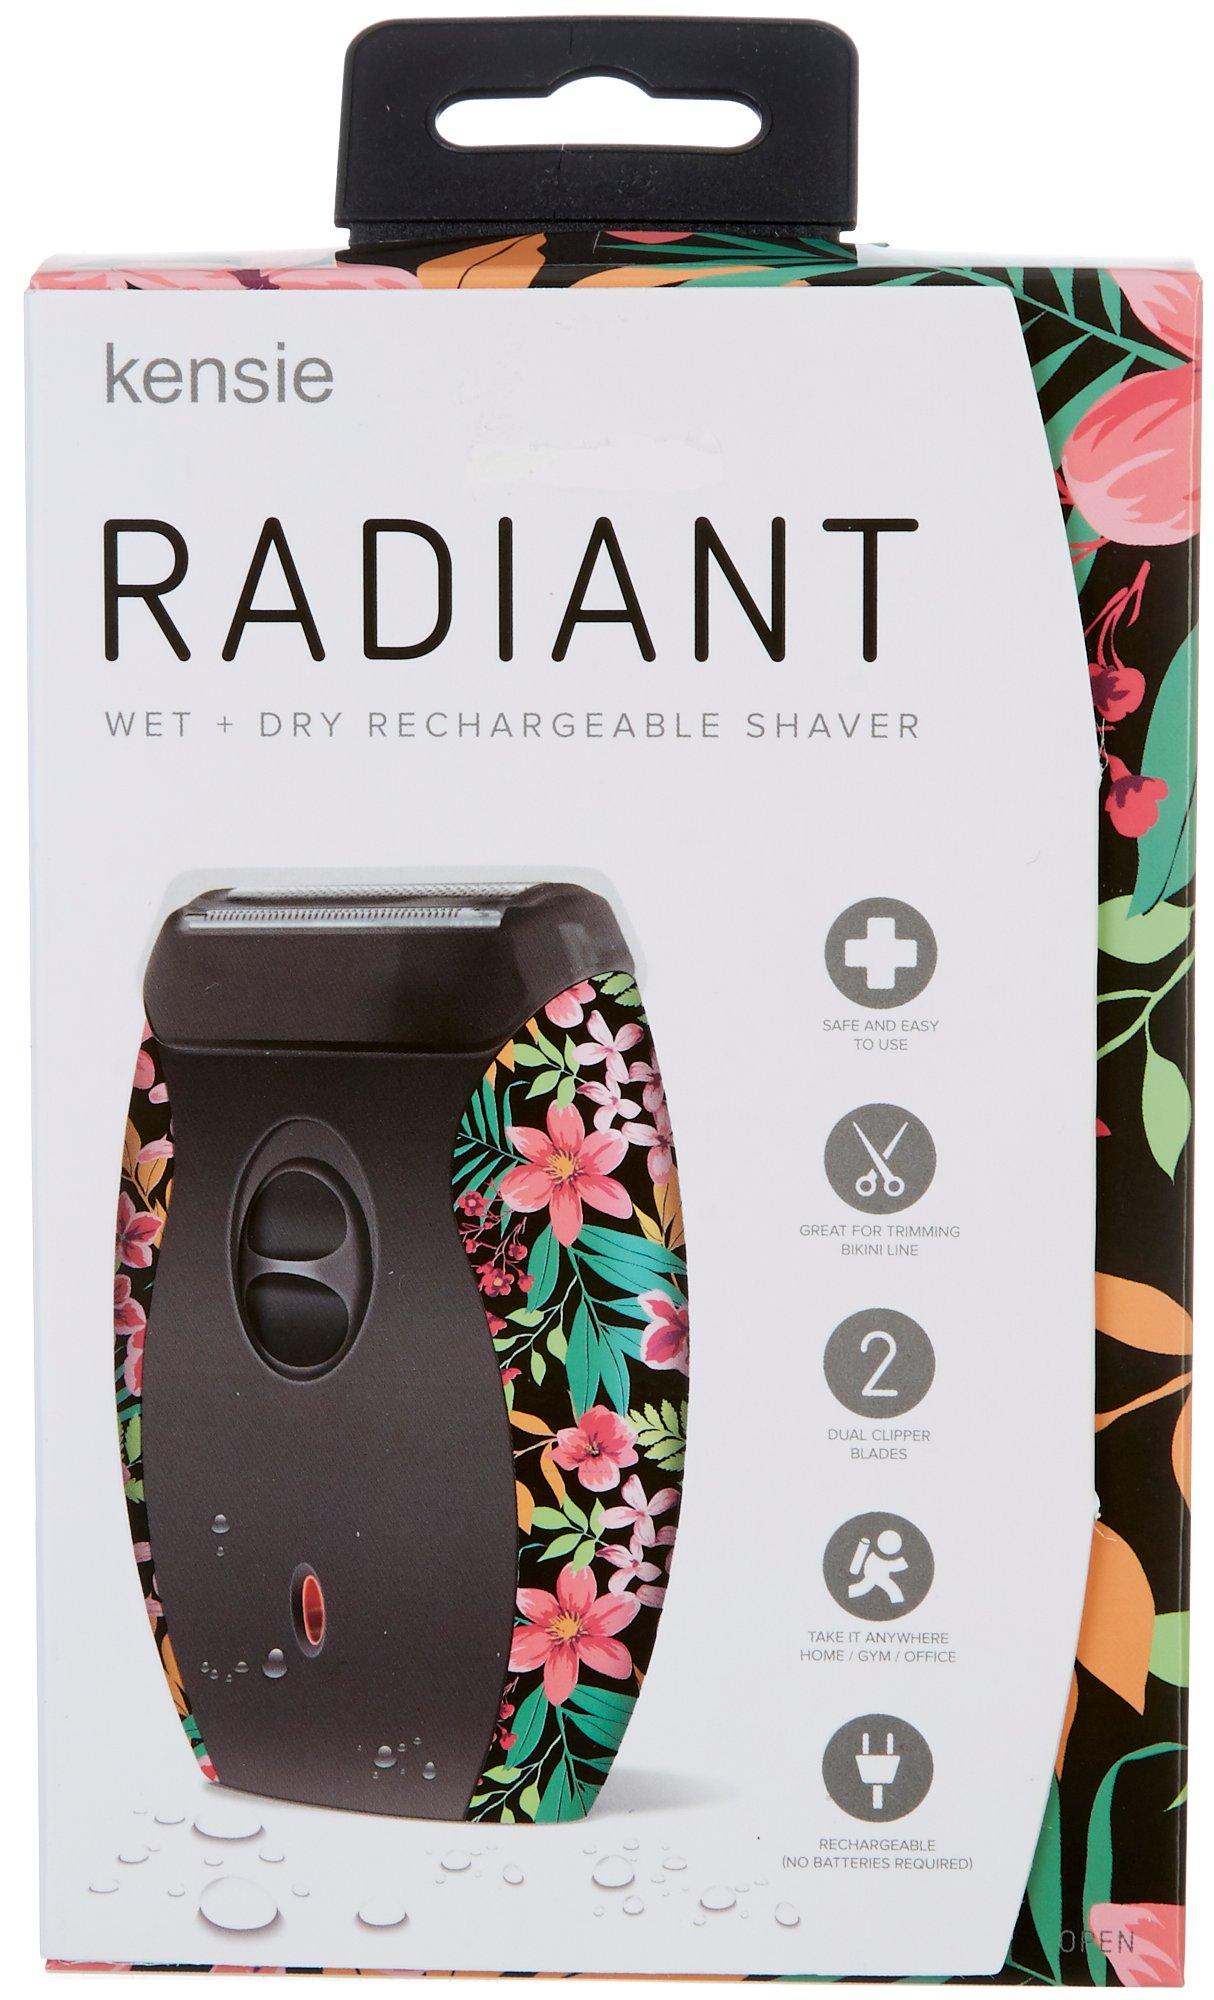 Kensie Radiant Wet & Dry Rechargeable Shaver